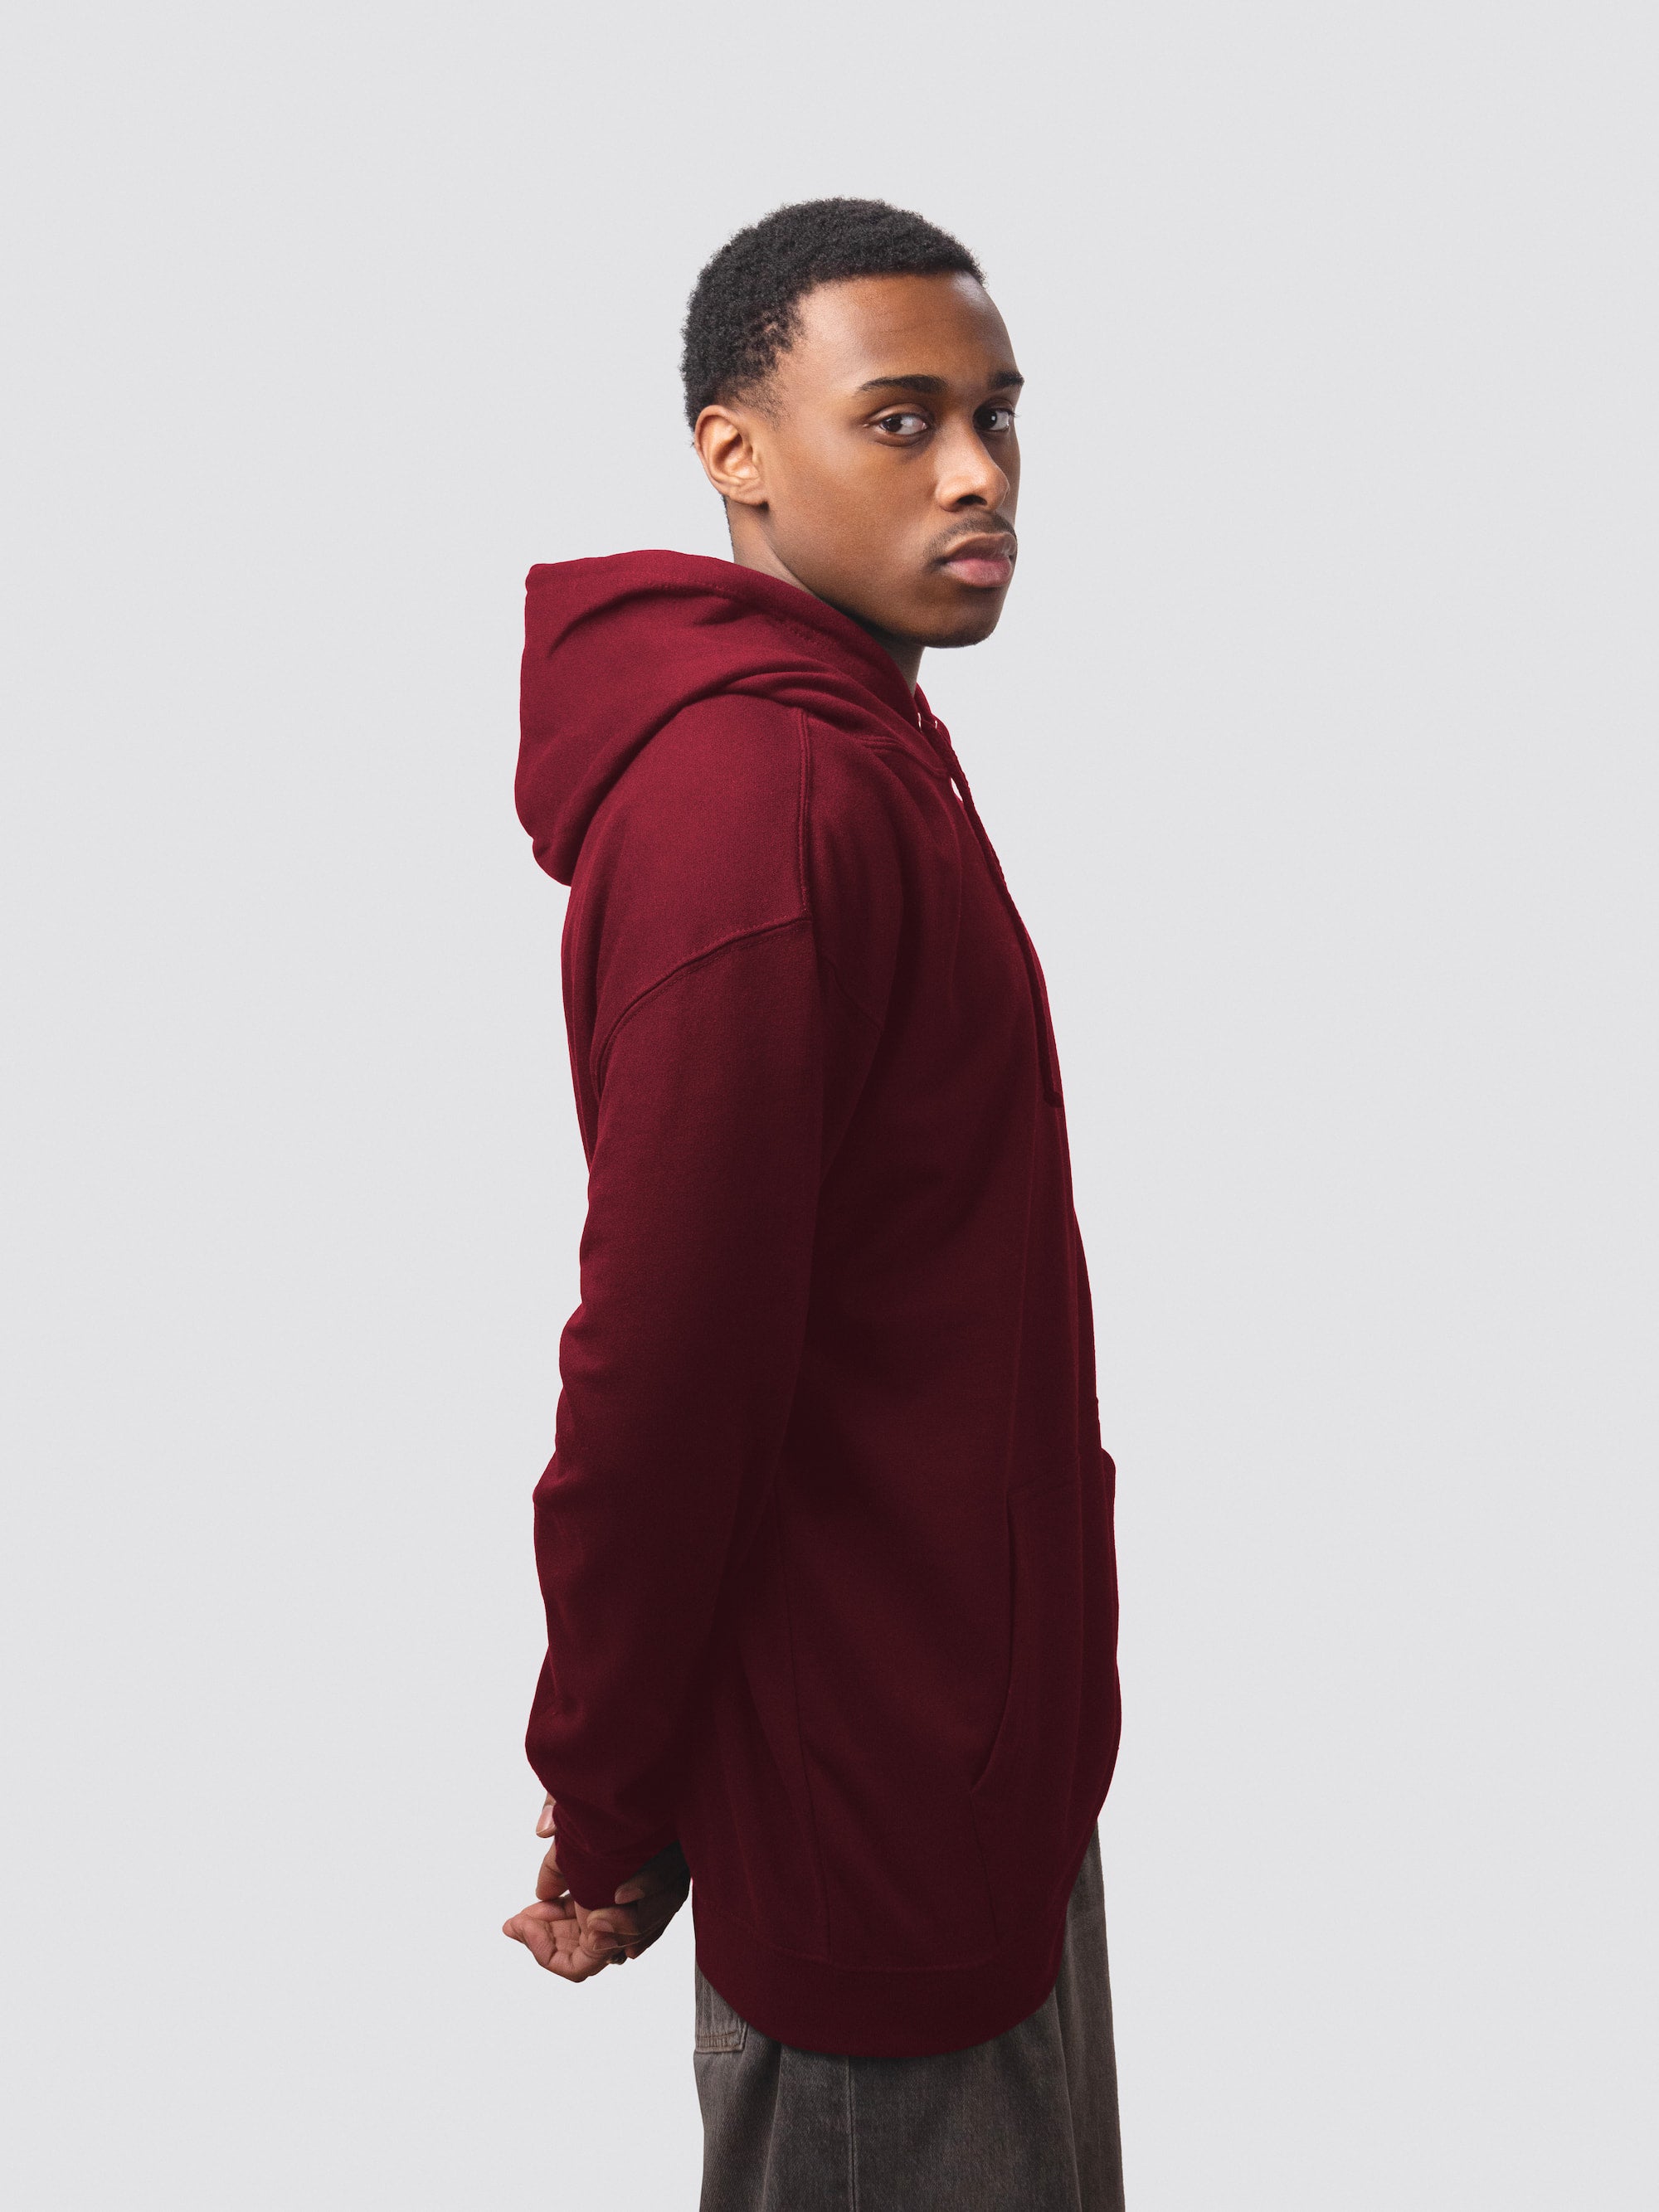 Ustinov College hoodie, made from burgundy cotton-faced fabric